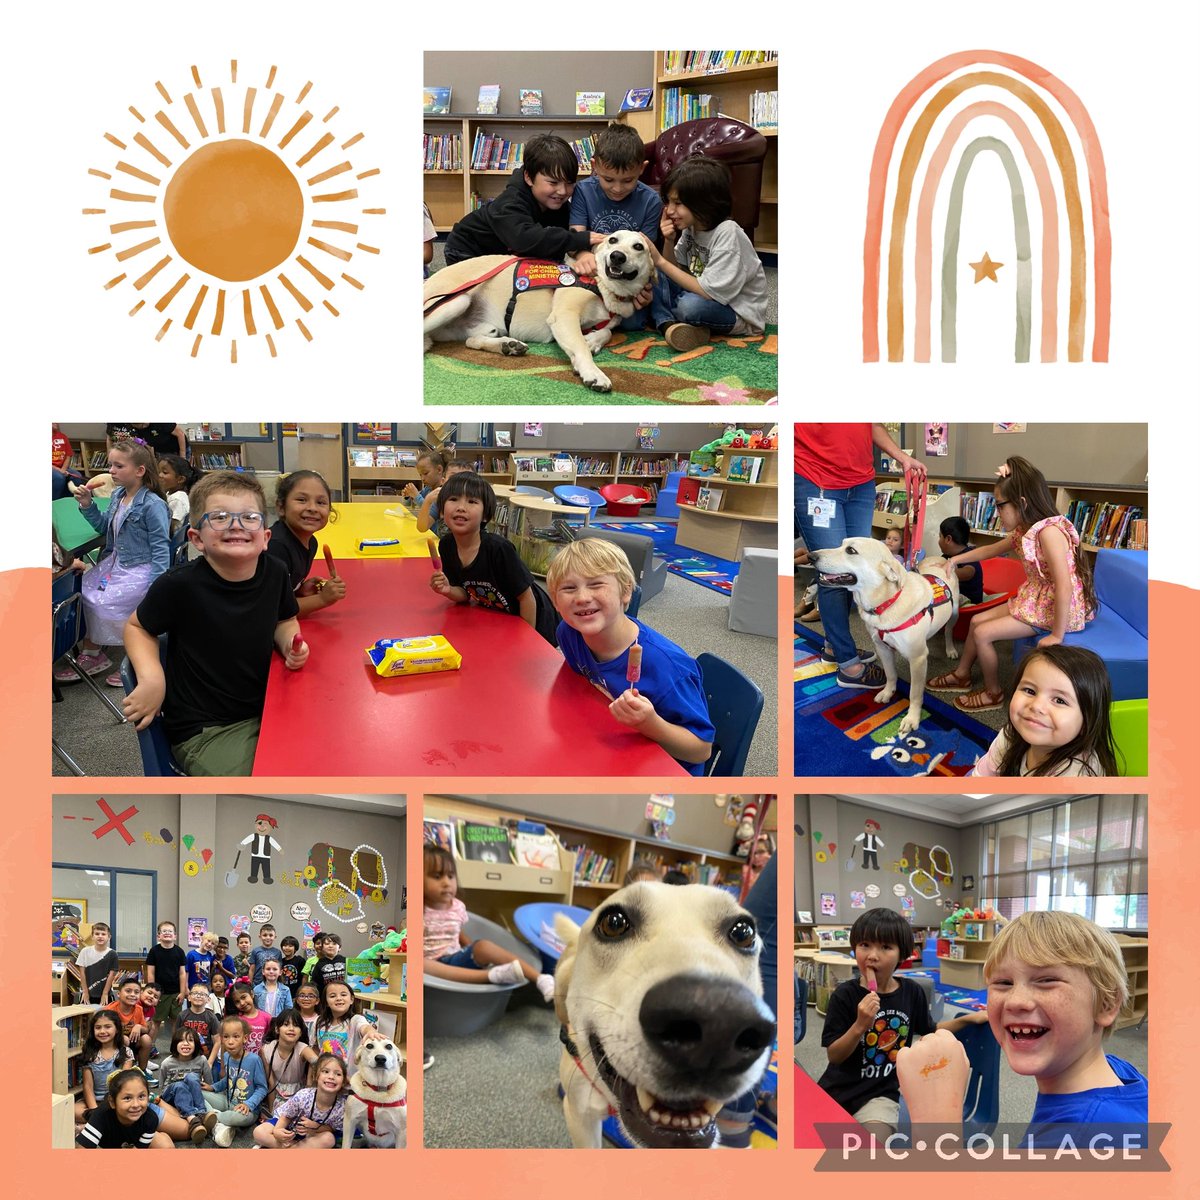 Celebrating PA incentive for the month of April- Sts w/0 absences, tardies, & no early leaves for the mth of April was definitely something to bark about!Our Prek, K & 1st graders enjoyed their Pupcicle party w/ Rocco the therapy dog. @lytlesuptmcs @teachthefuture @EduCollegiate